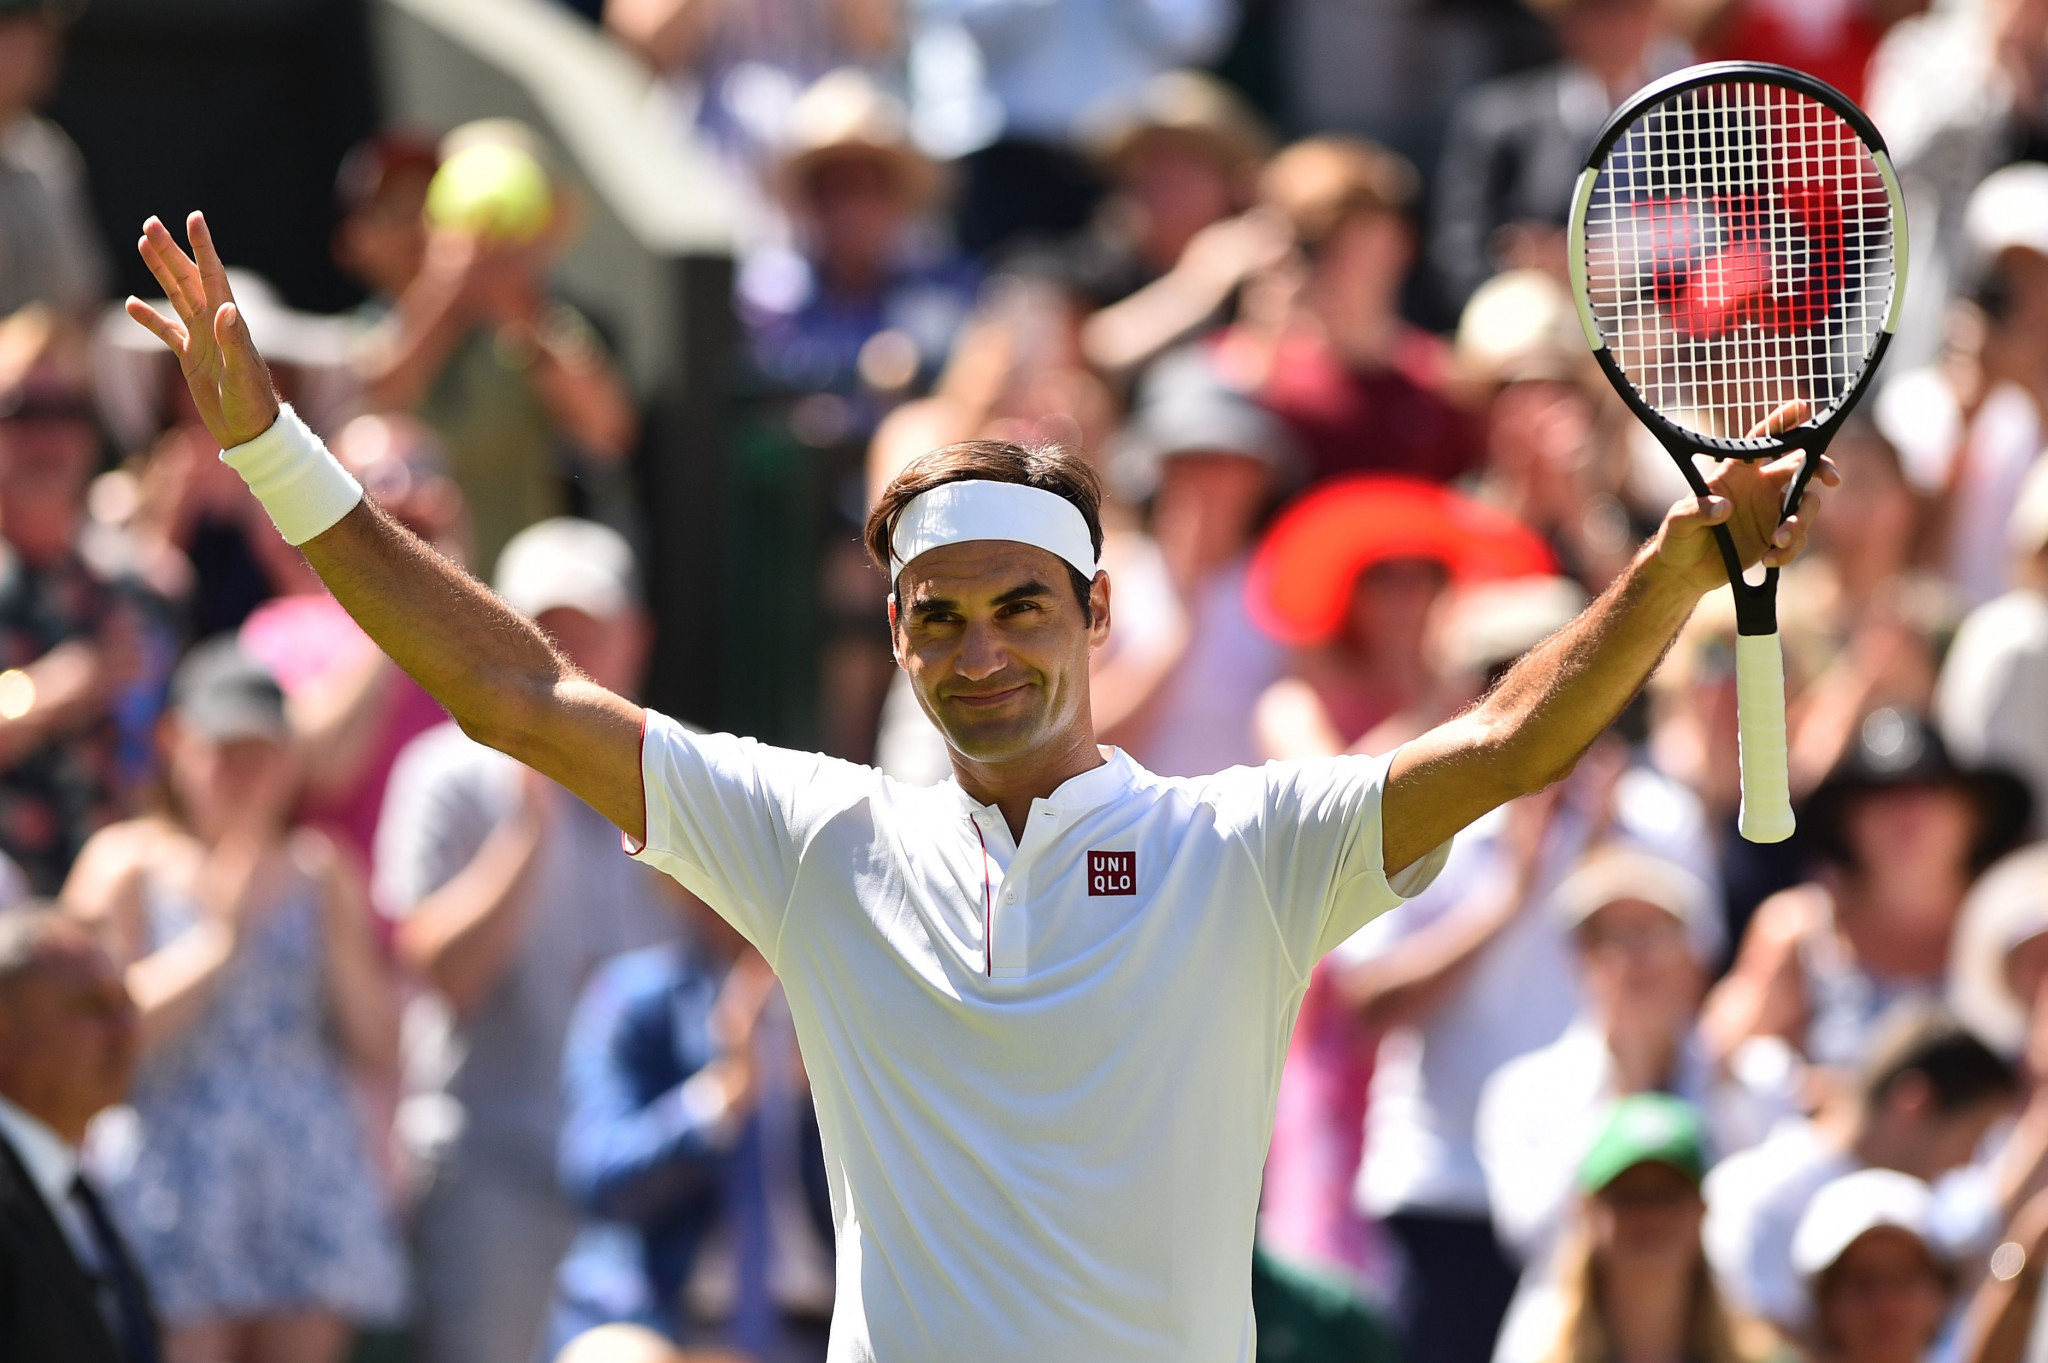 Federer and Williams both win on opening day of Wimbledon 